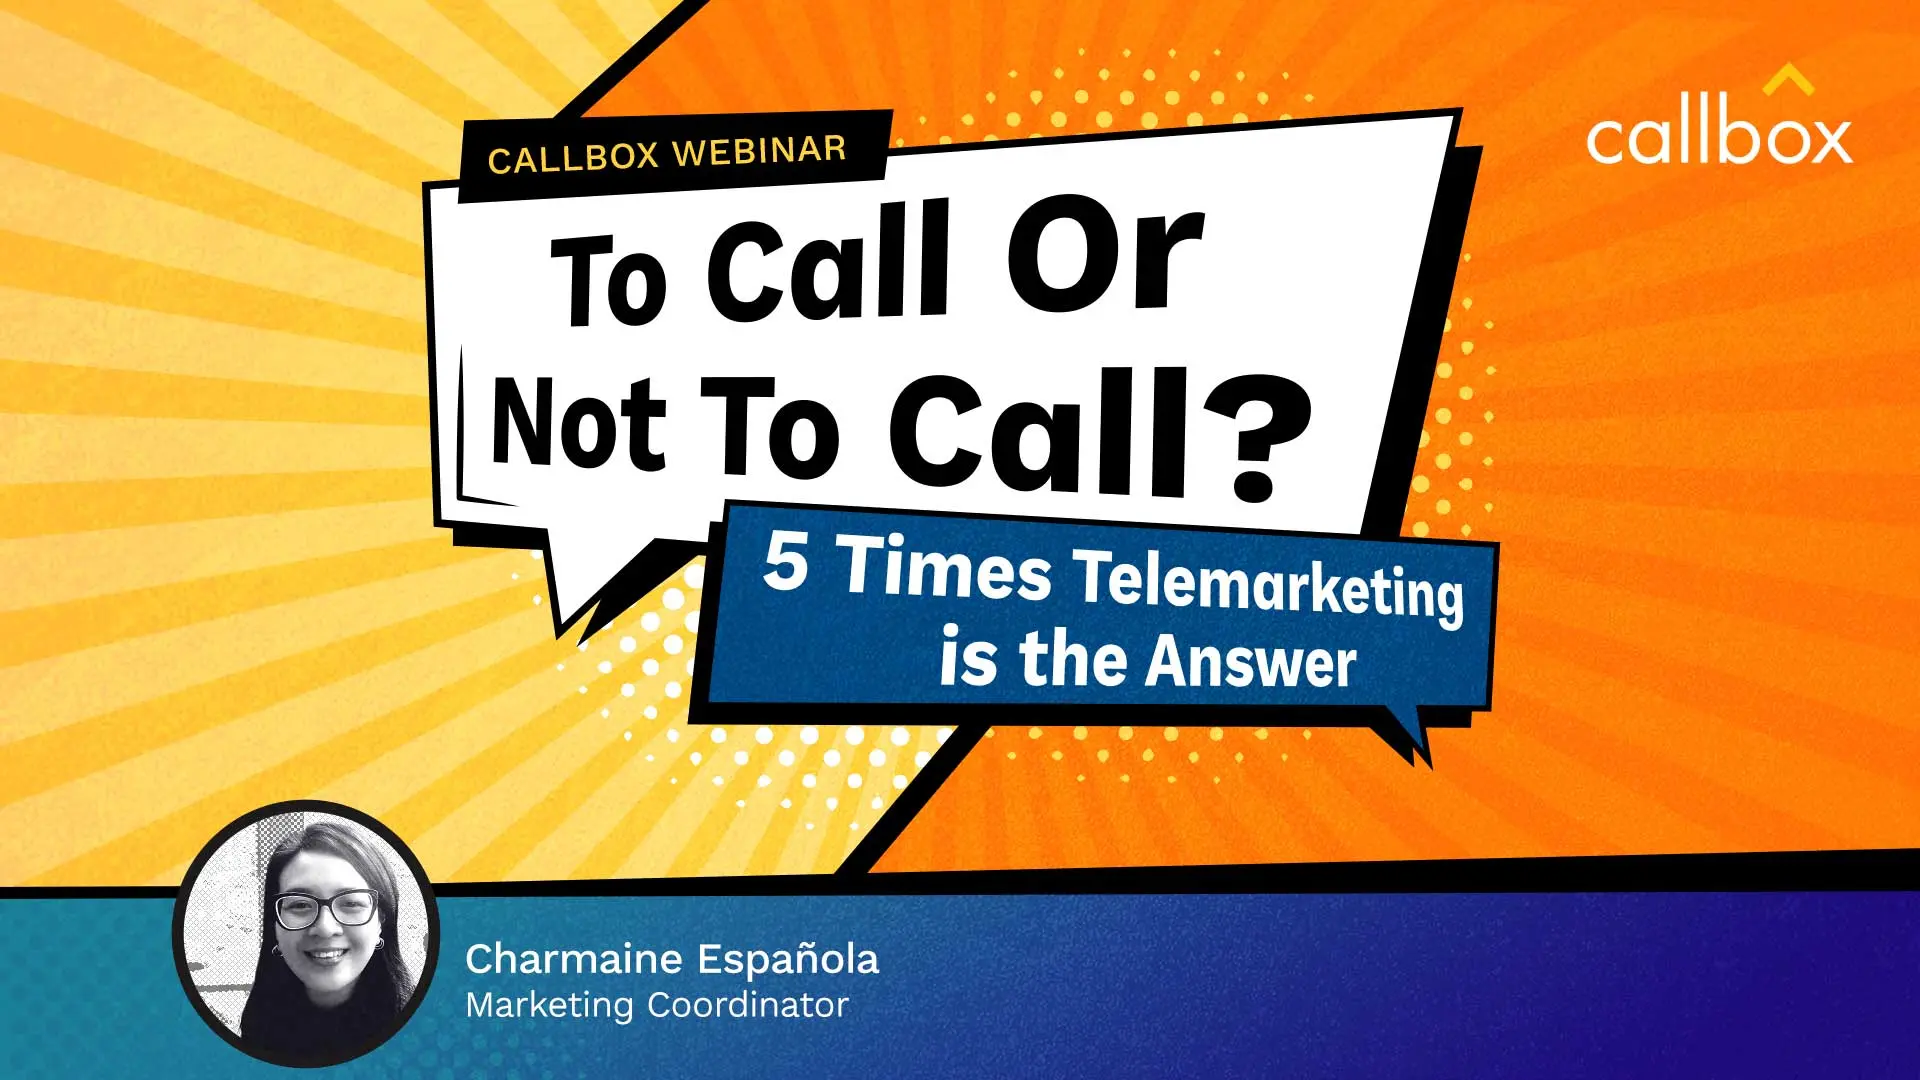 To Call Or Not To Call? 5 Times Telemarketing is the Answer